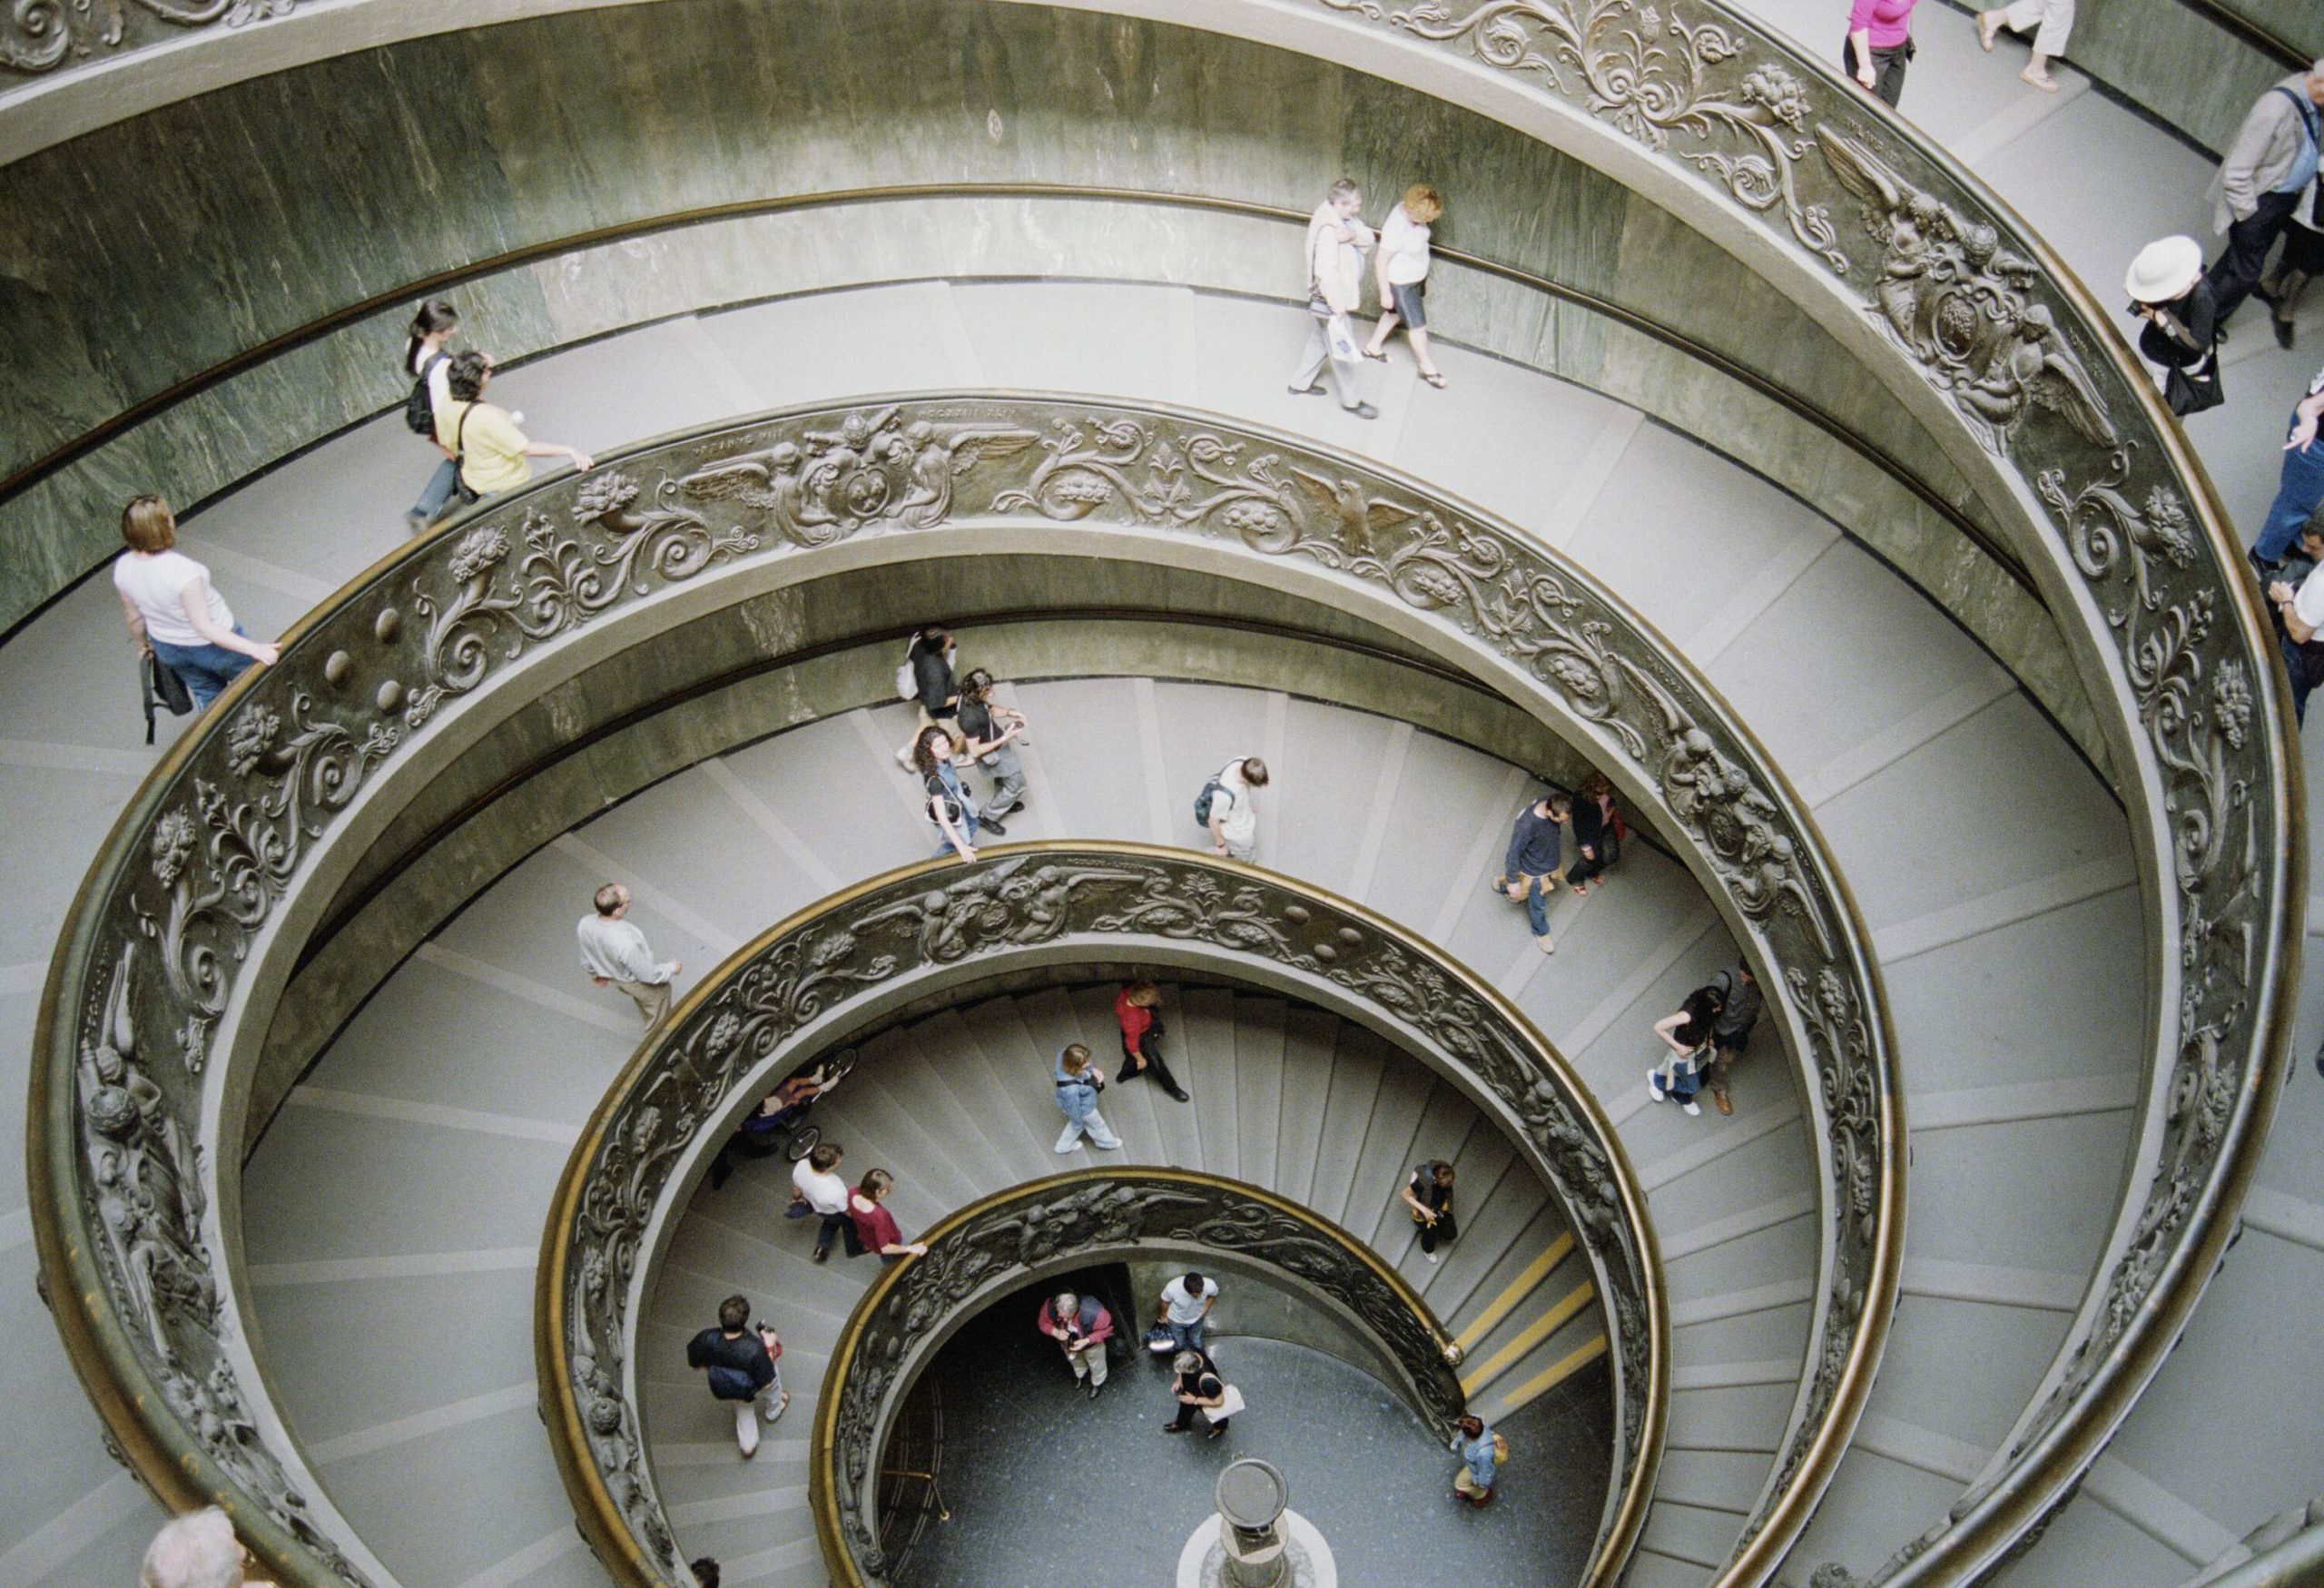 Visitors gracefully descend a captivating spiral staircase at the Vatican Museum.